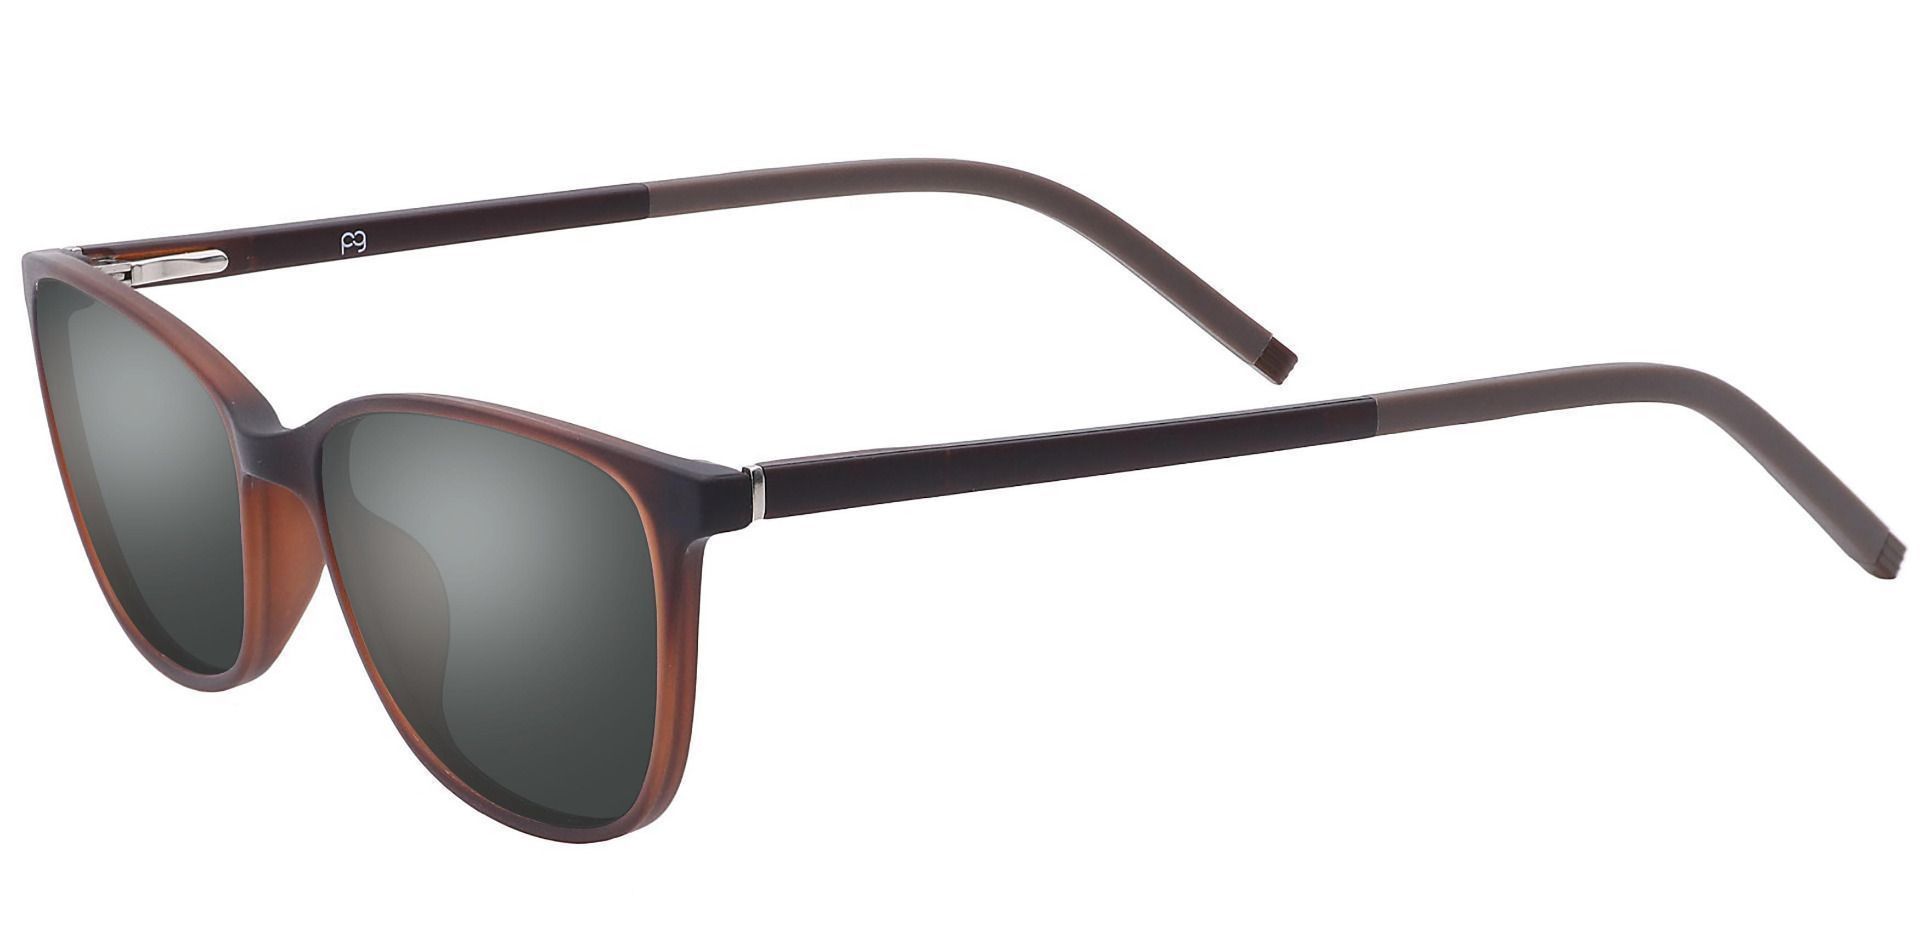 Danica Square Reading Sunglasses - Brown Frame With Gray Lenses